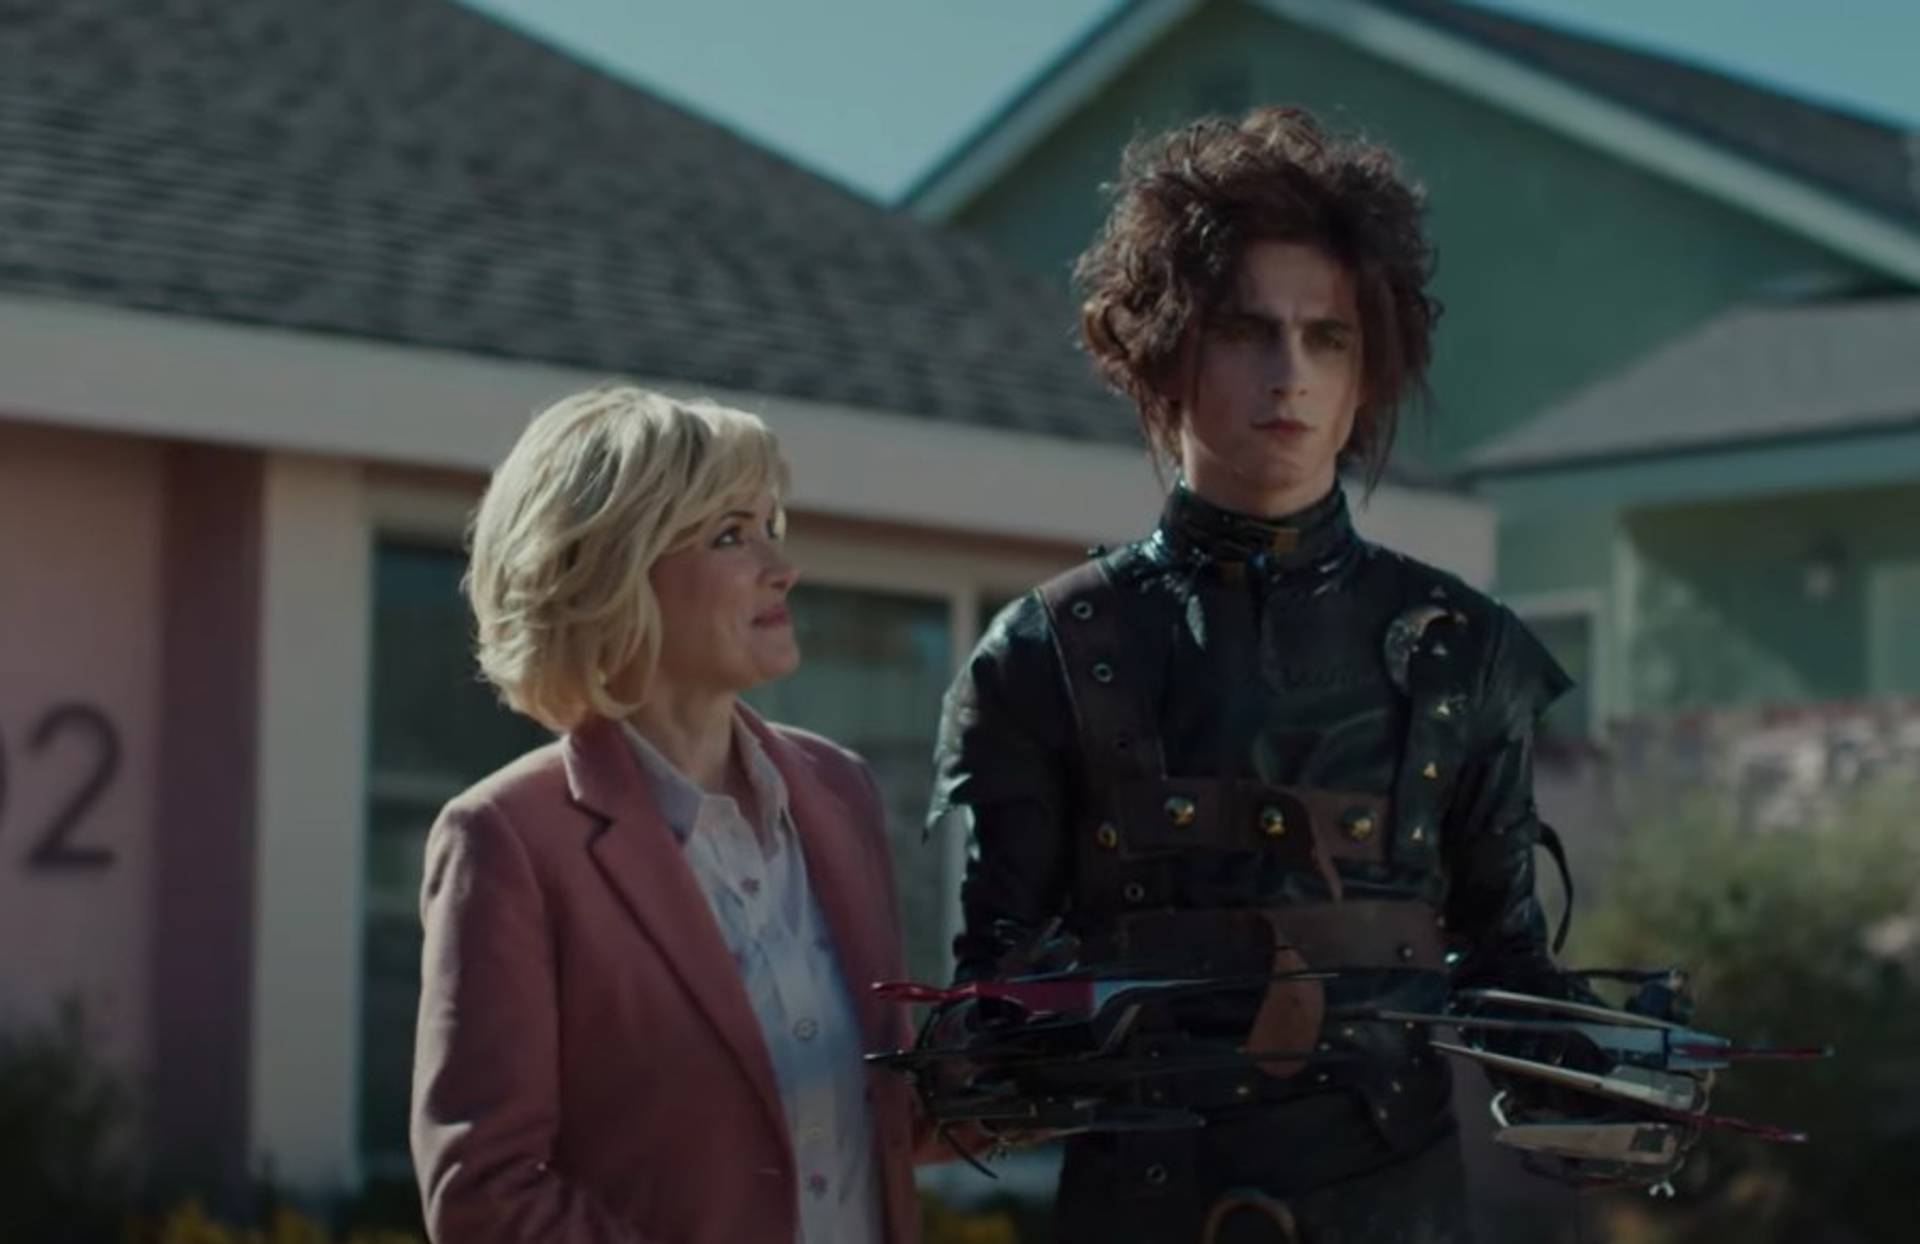 Cadillac's 'Scissorhands' ad delights nostalgic viewers